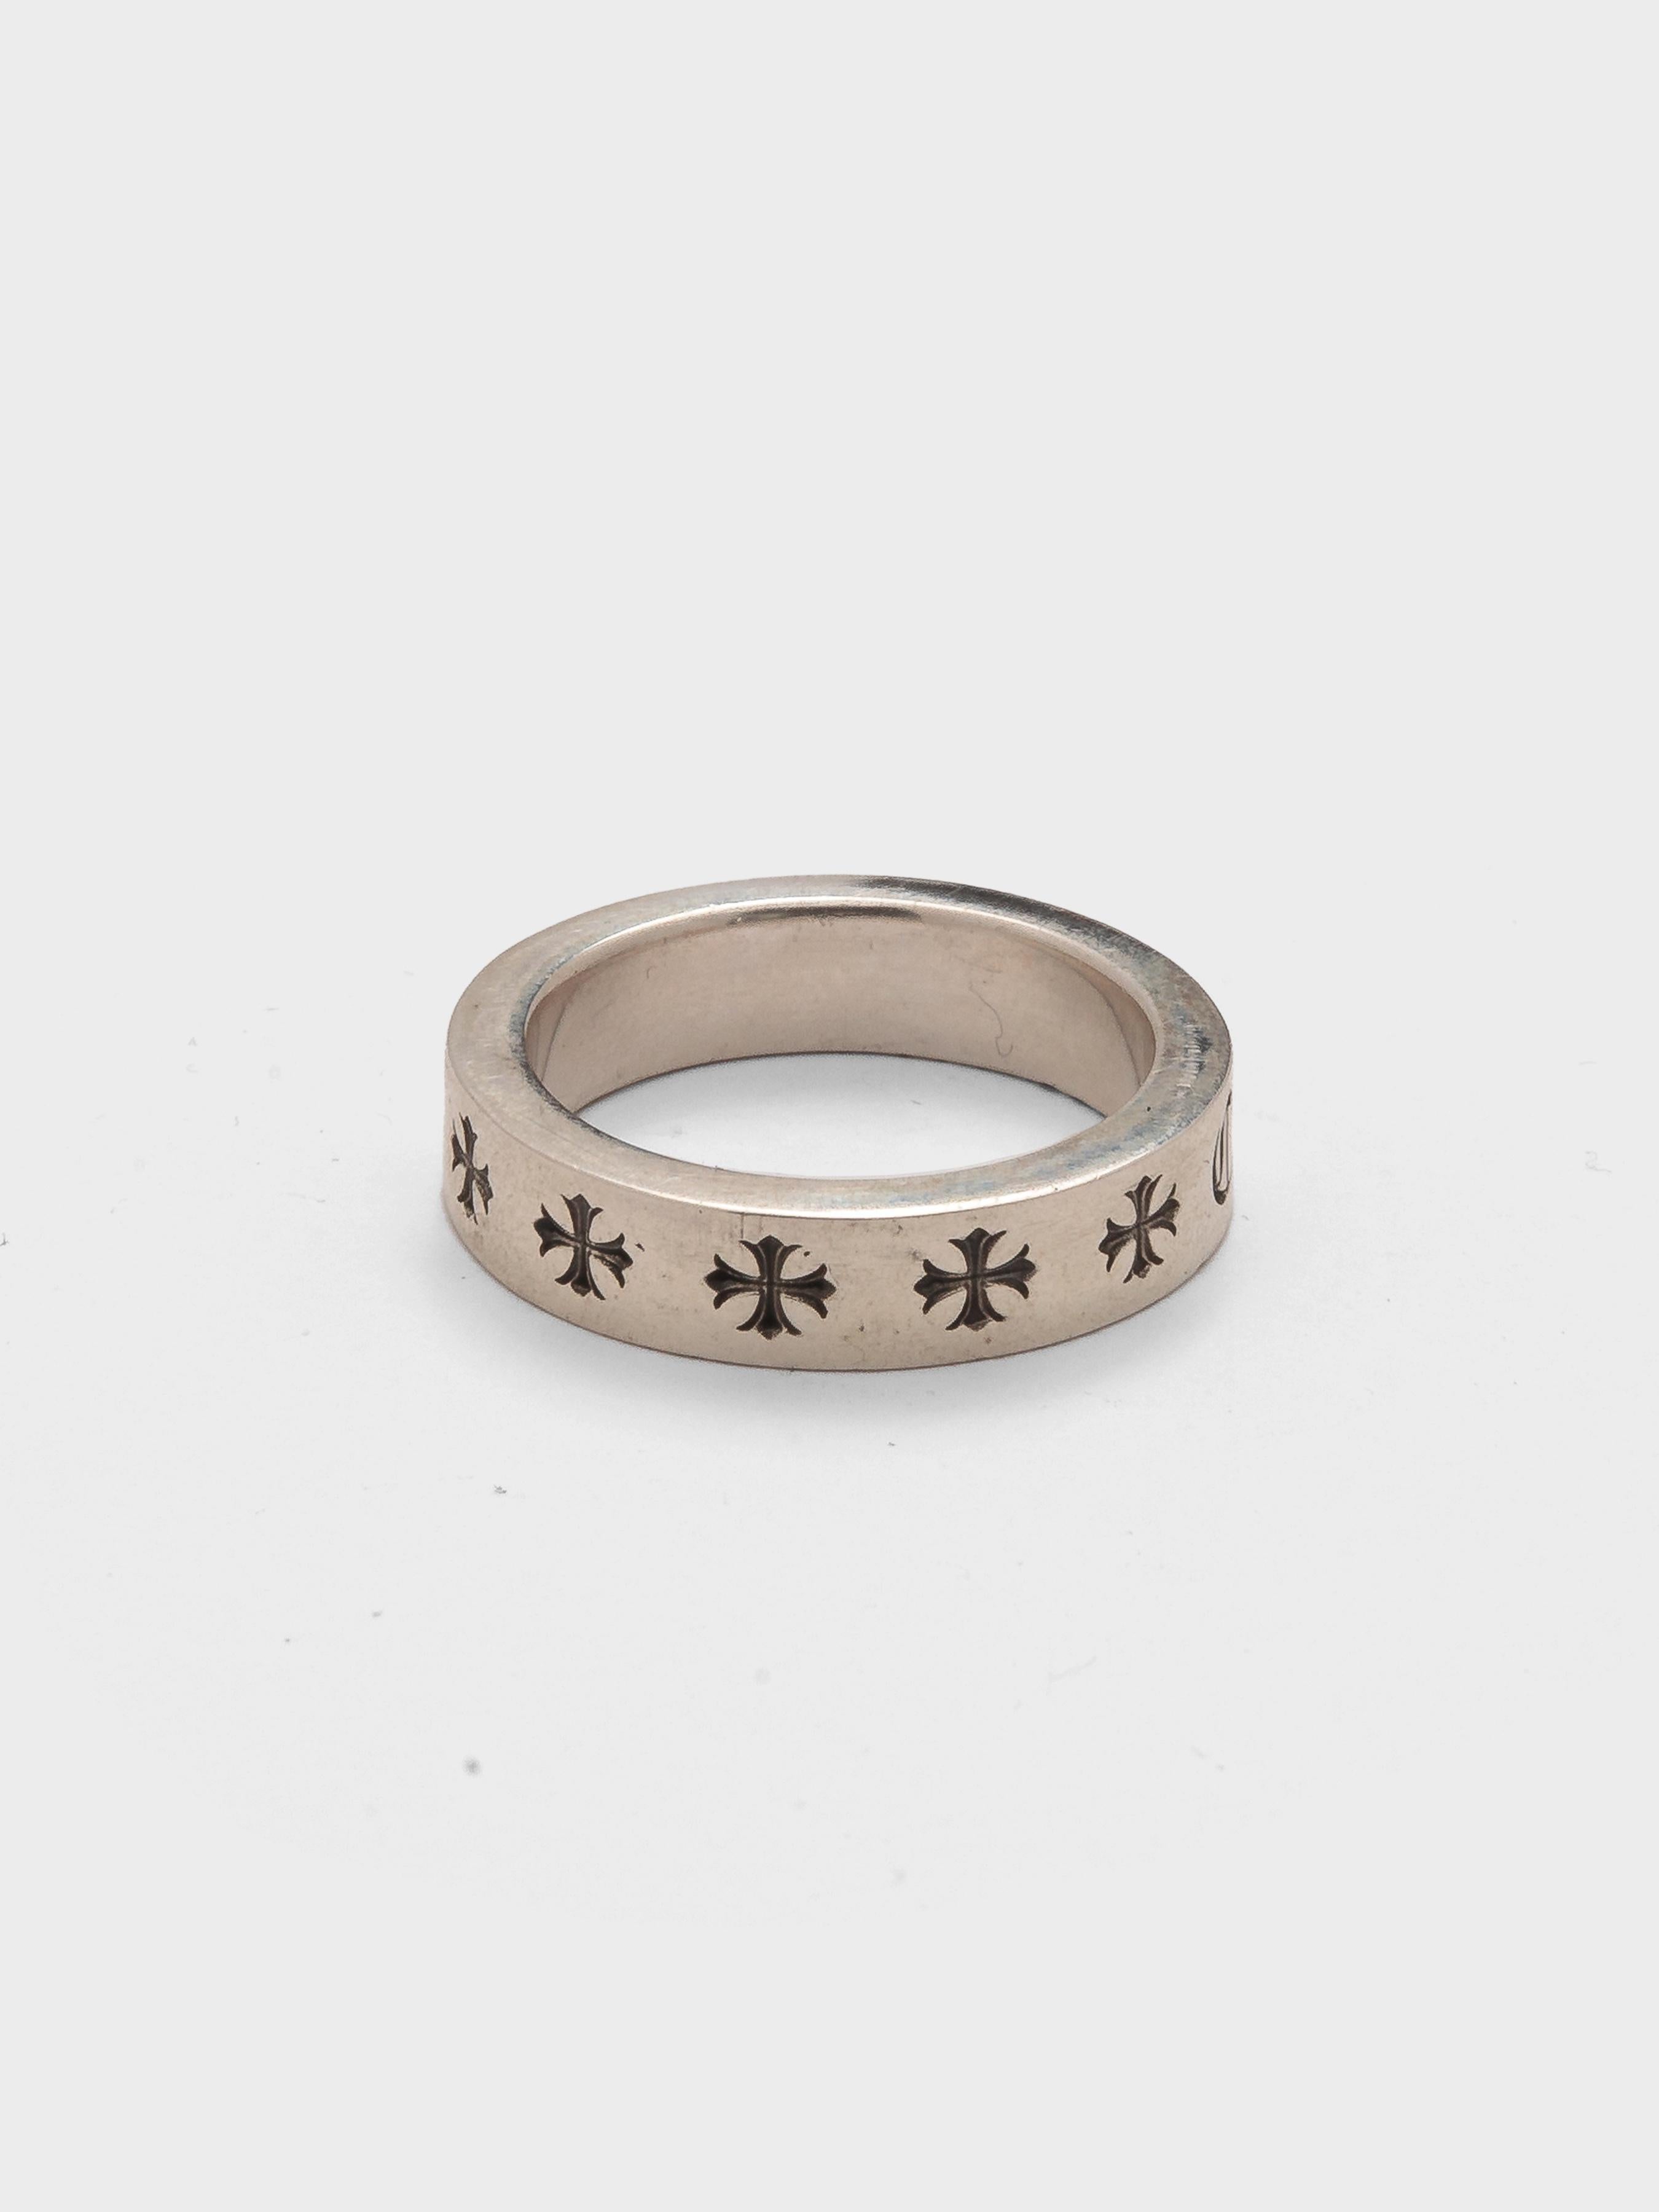 ✓ Authenticated

Our trained in-house authentication experts have reviewed this item to ensure that it is original. We guarantee its authenticity.

Here is a gently used Forever Ring from Chrome Hearts.

Condition: Like new 

